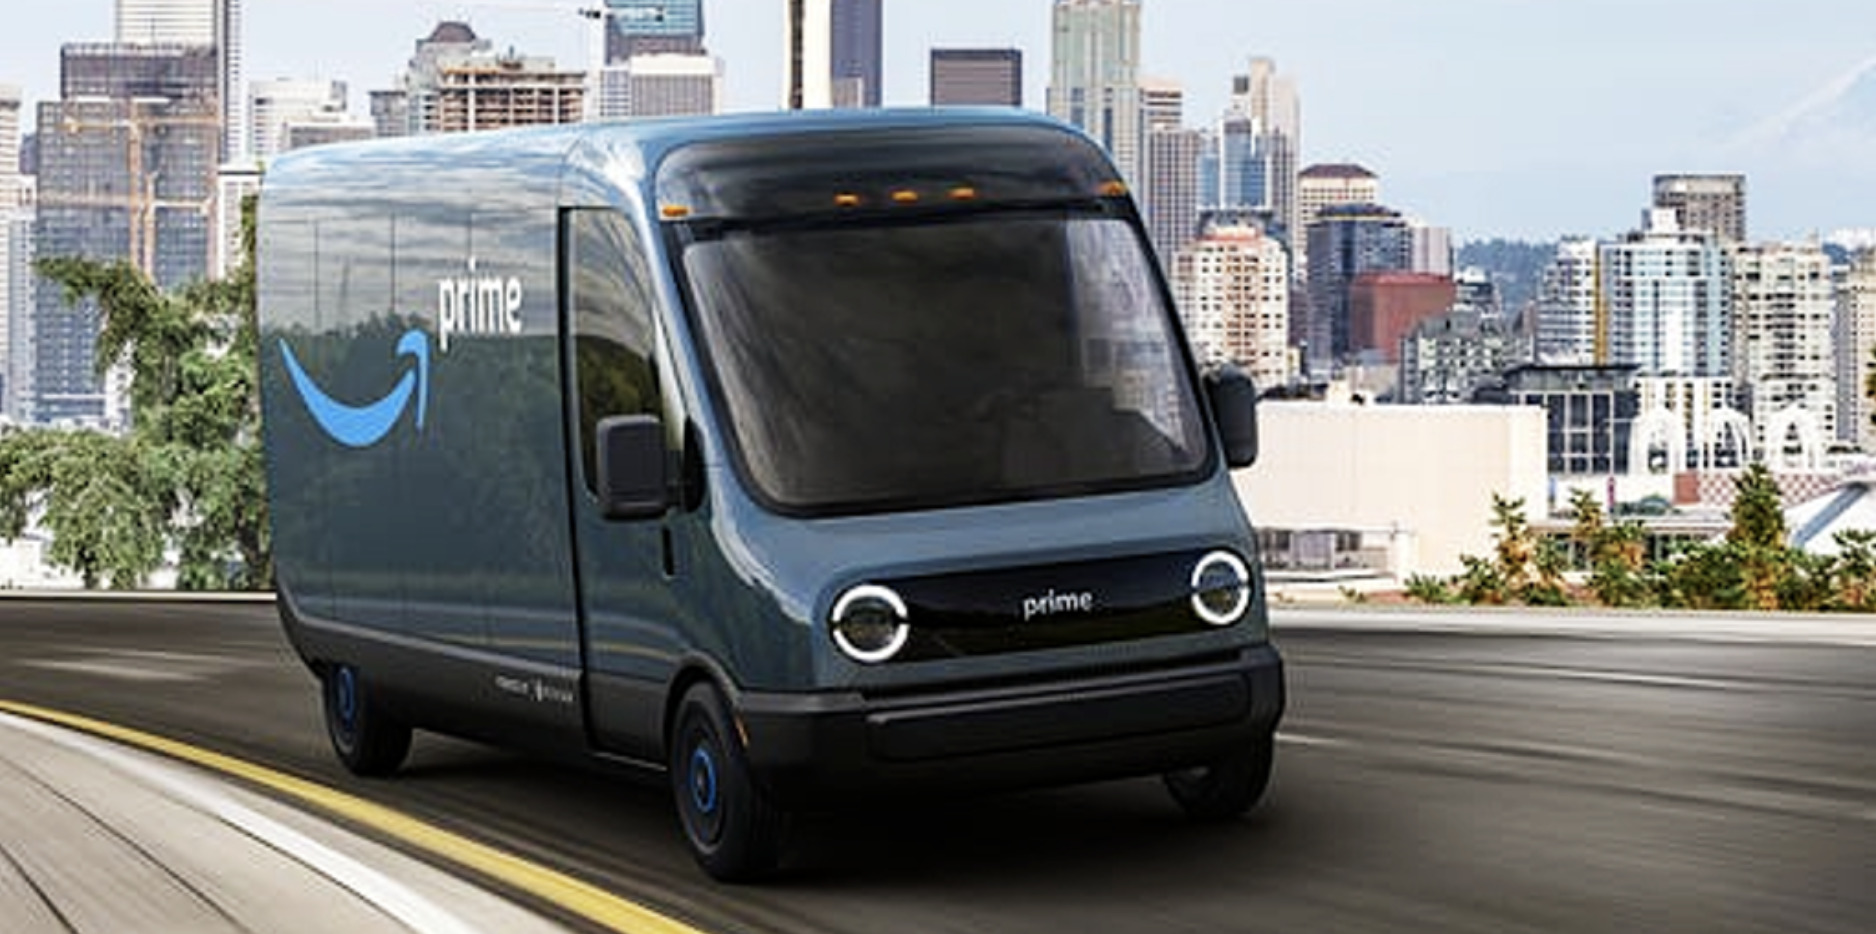 https://www.rethink.industries/article/amazons-new-wheels-100000-electric-delivery-vans-to-hit-the-road-in-2021/